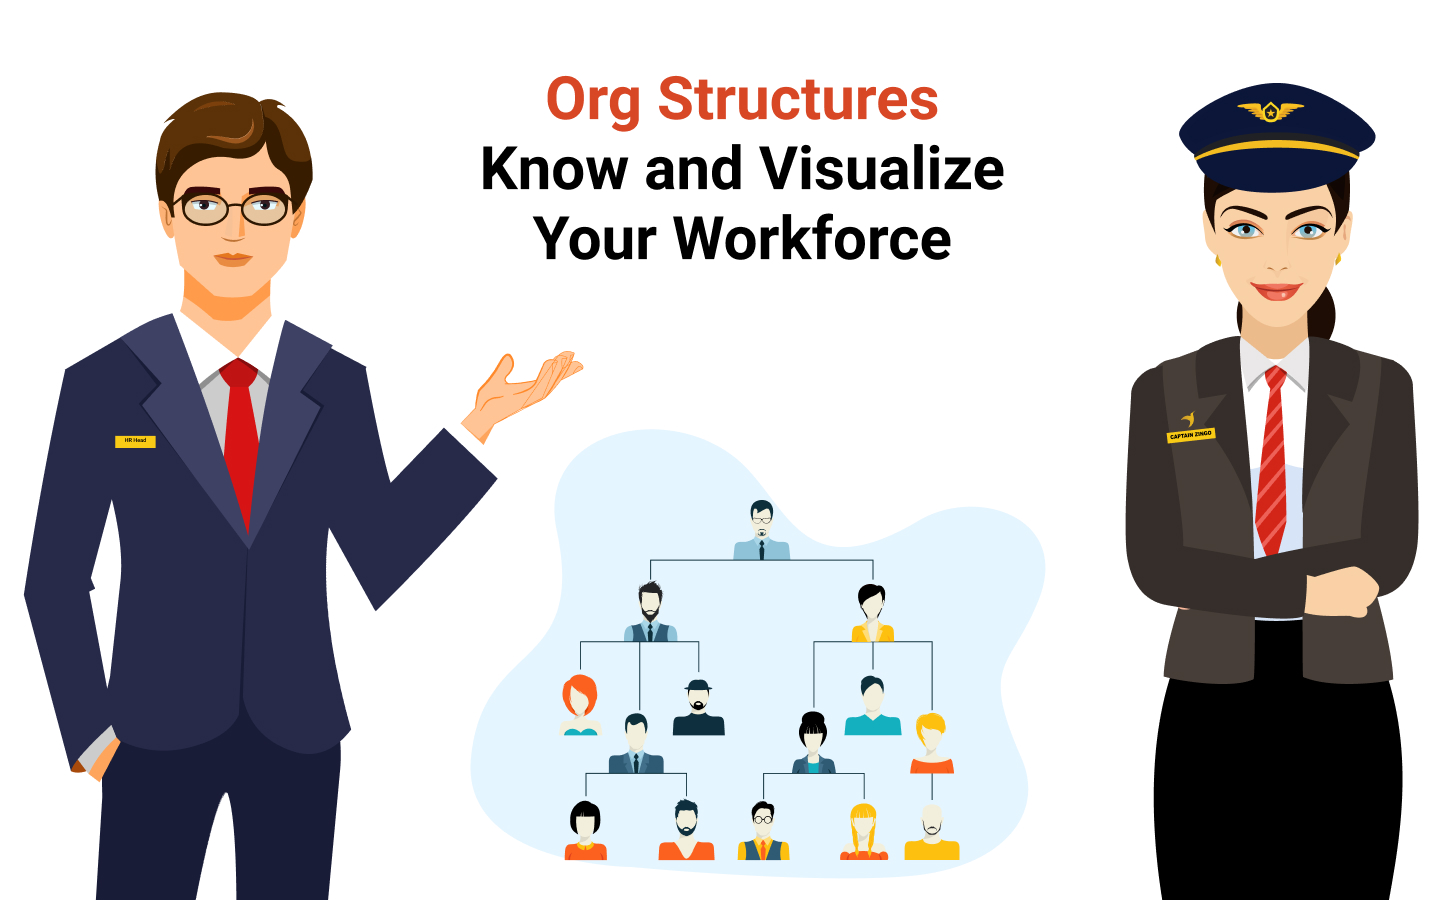 Org Structres- Know and Visualize Your Workforce